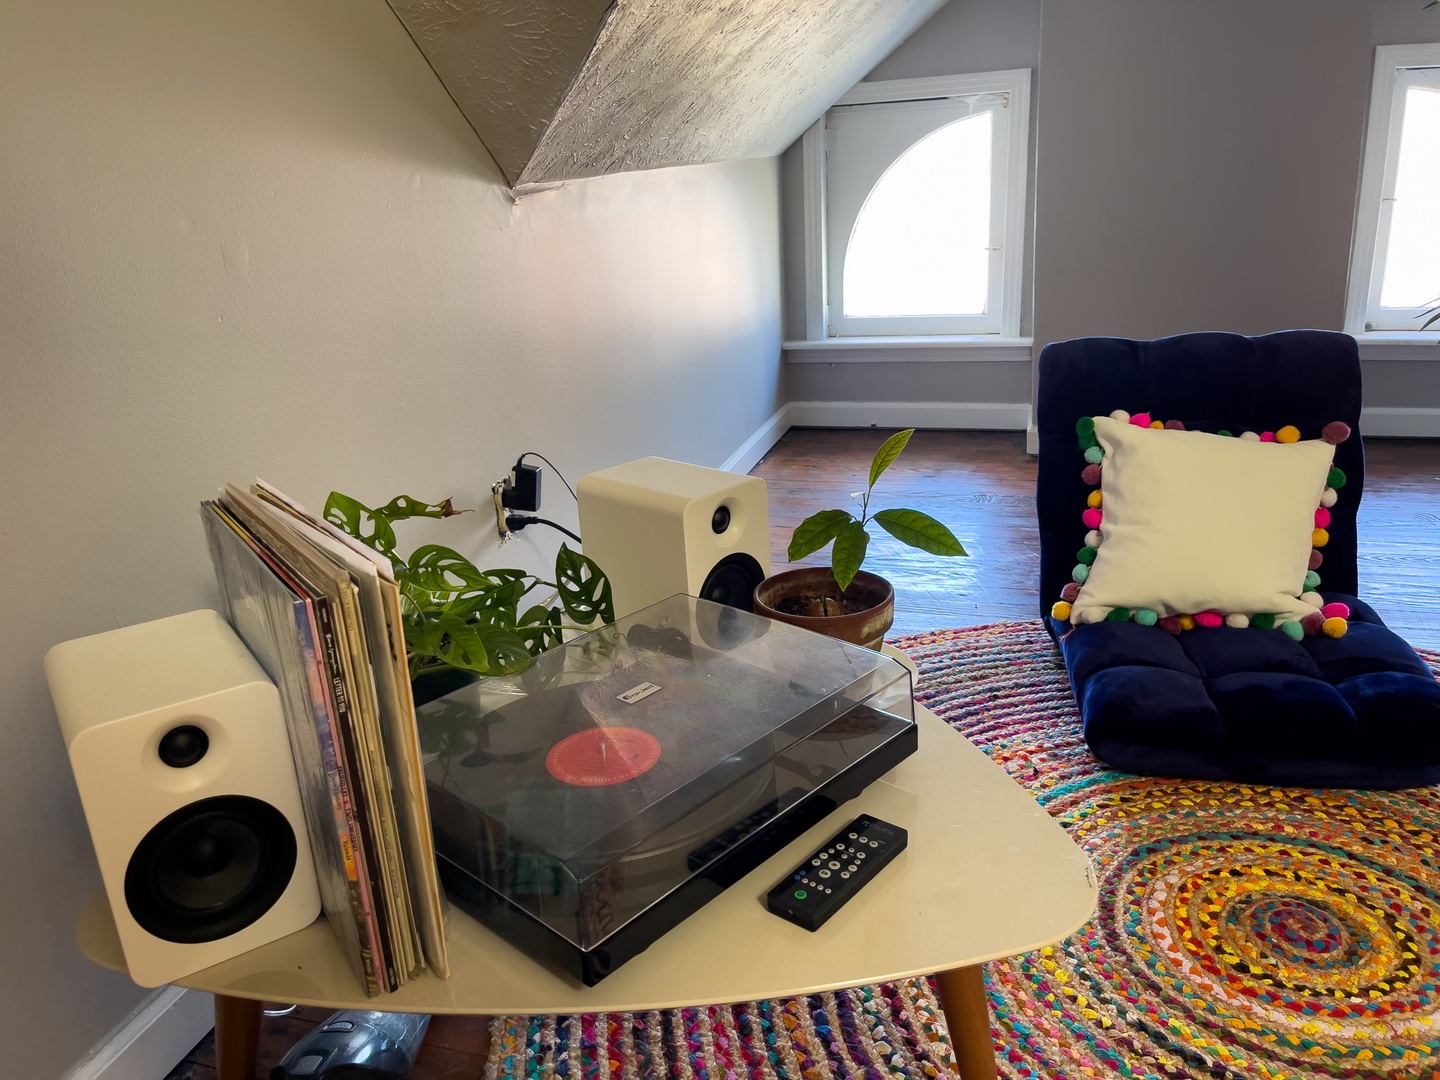 Music nook with record player